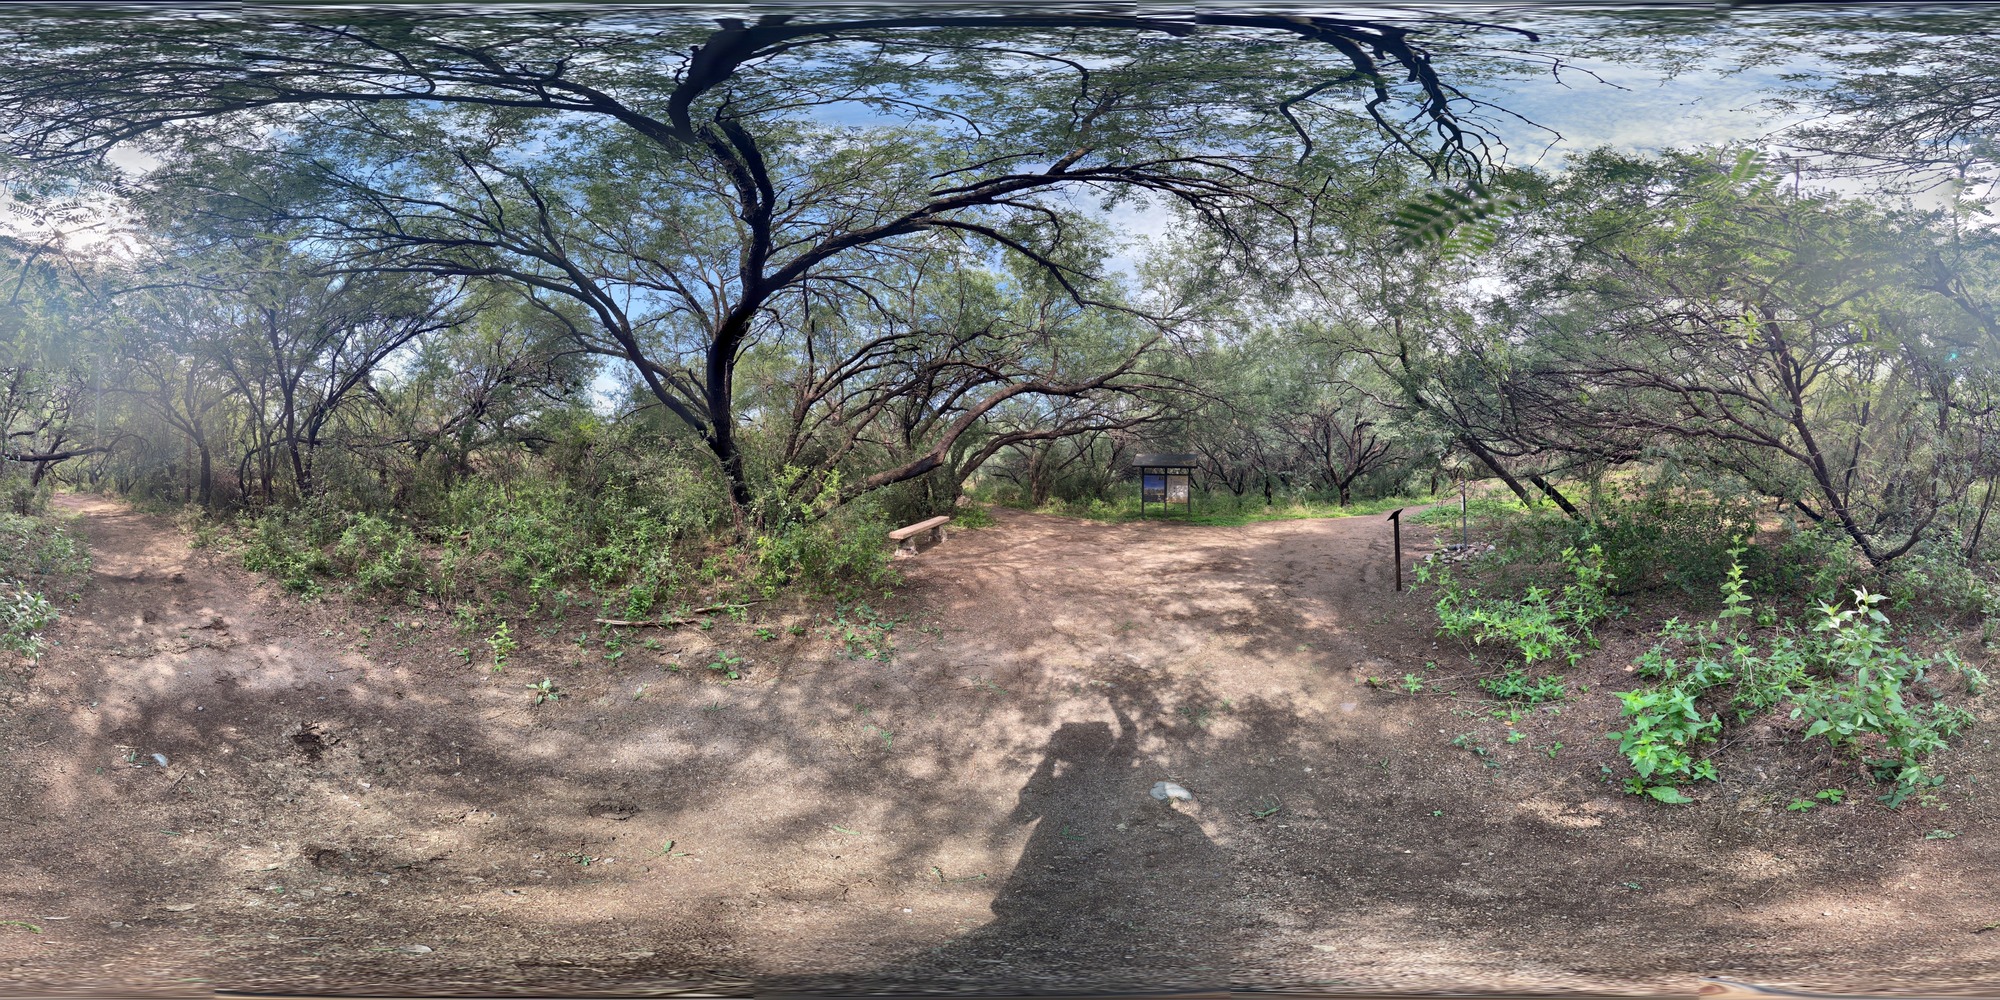 360 panoramic photo, mesquite trees, trails, bench, and wayside exhibit